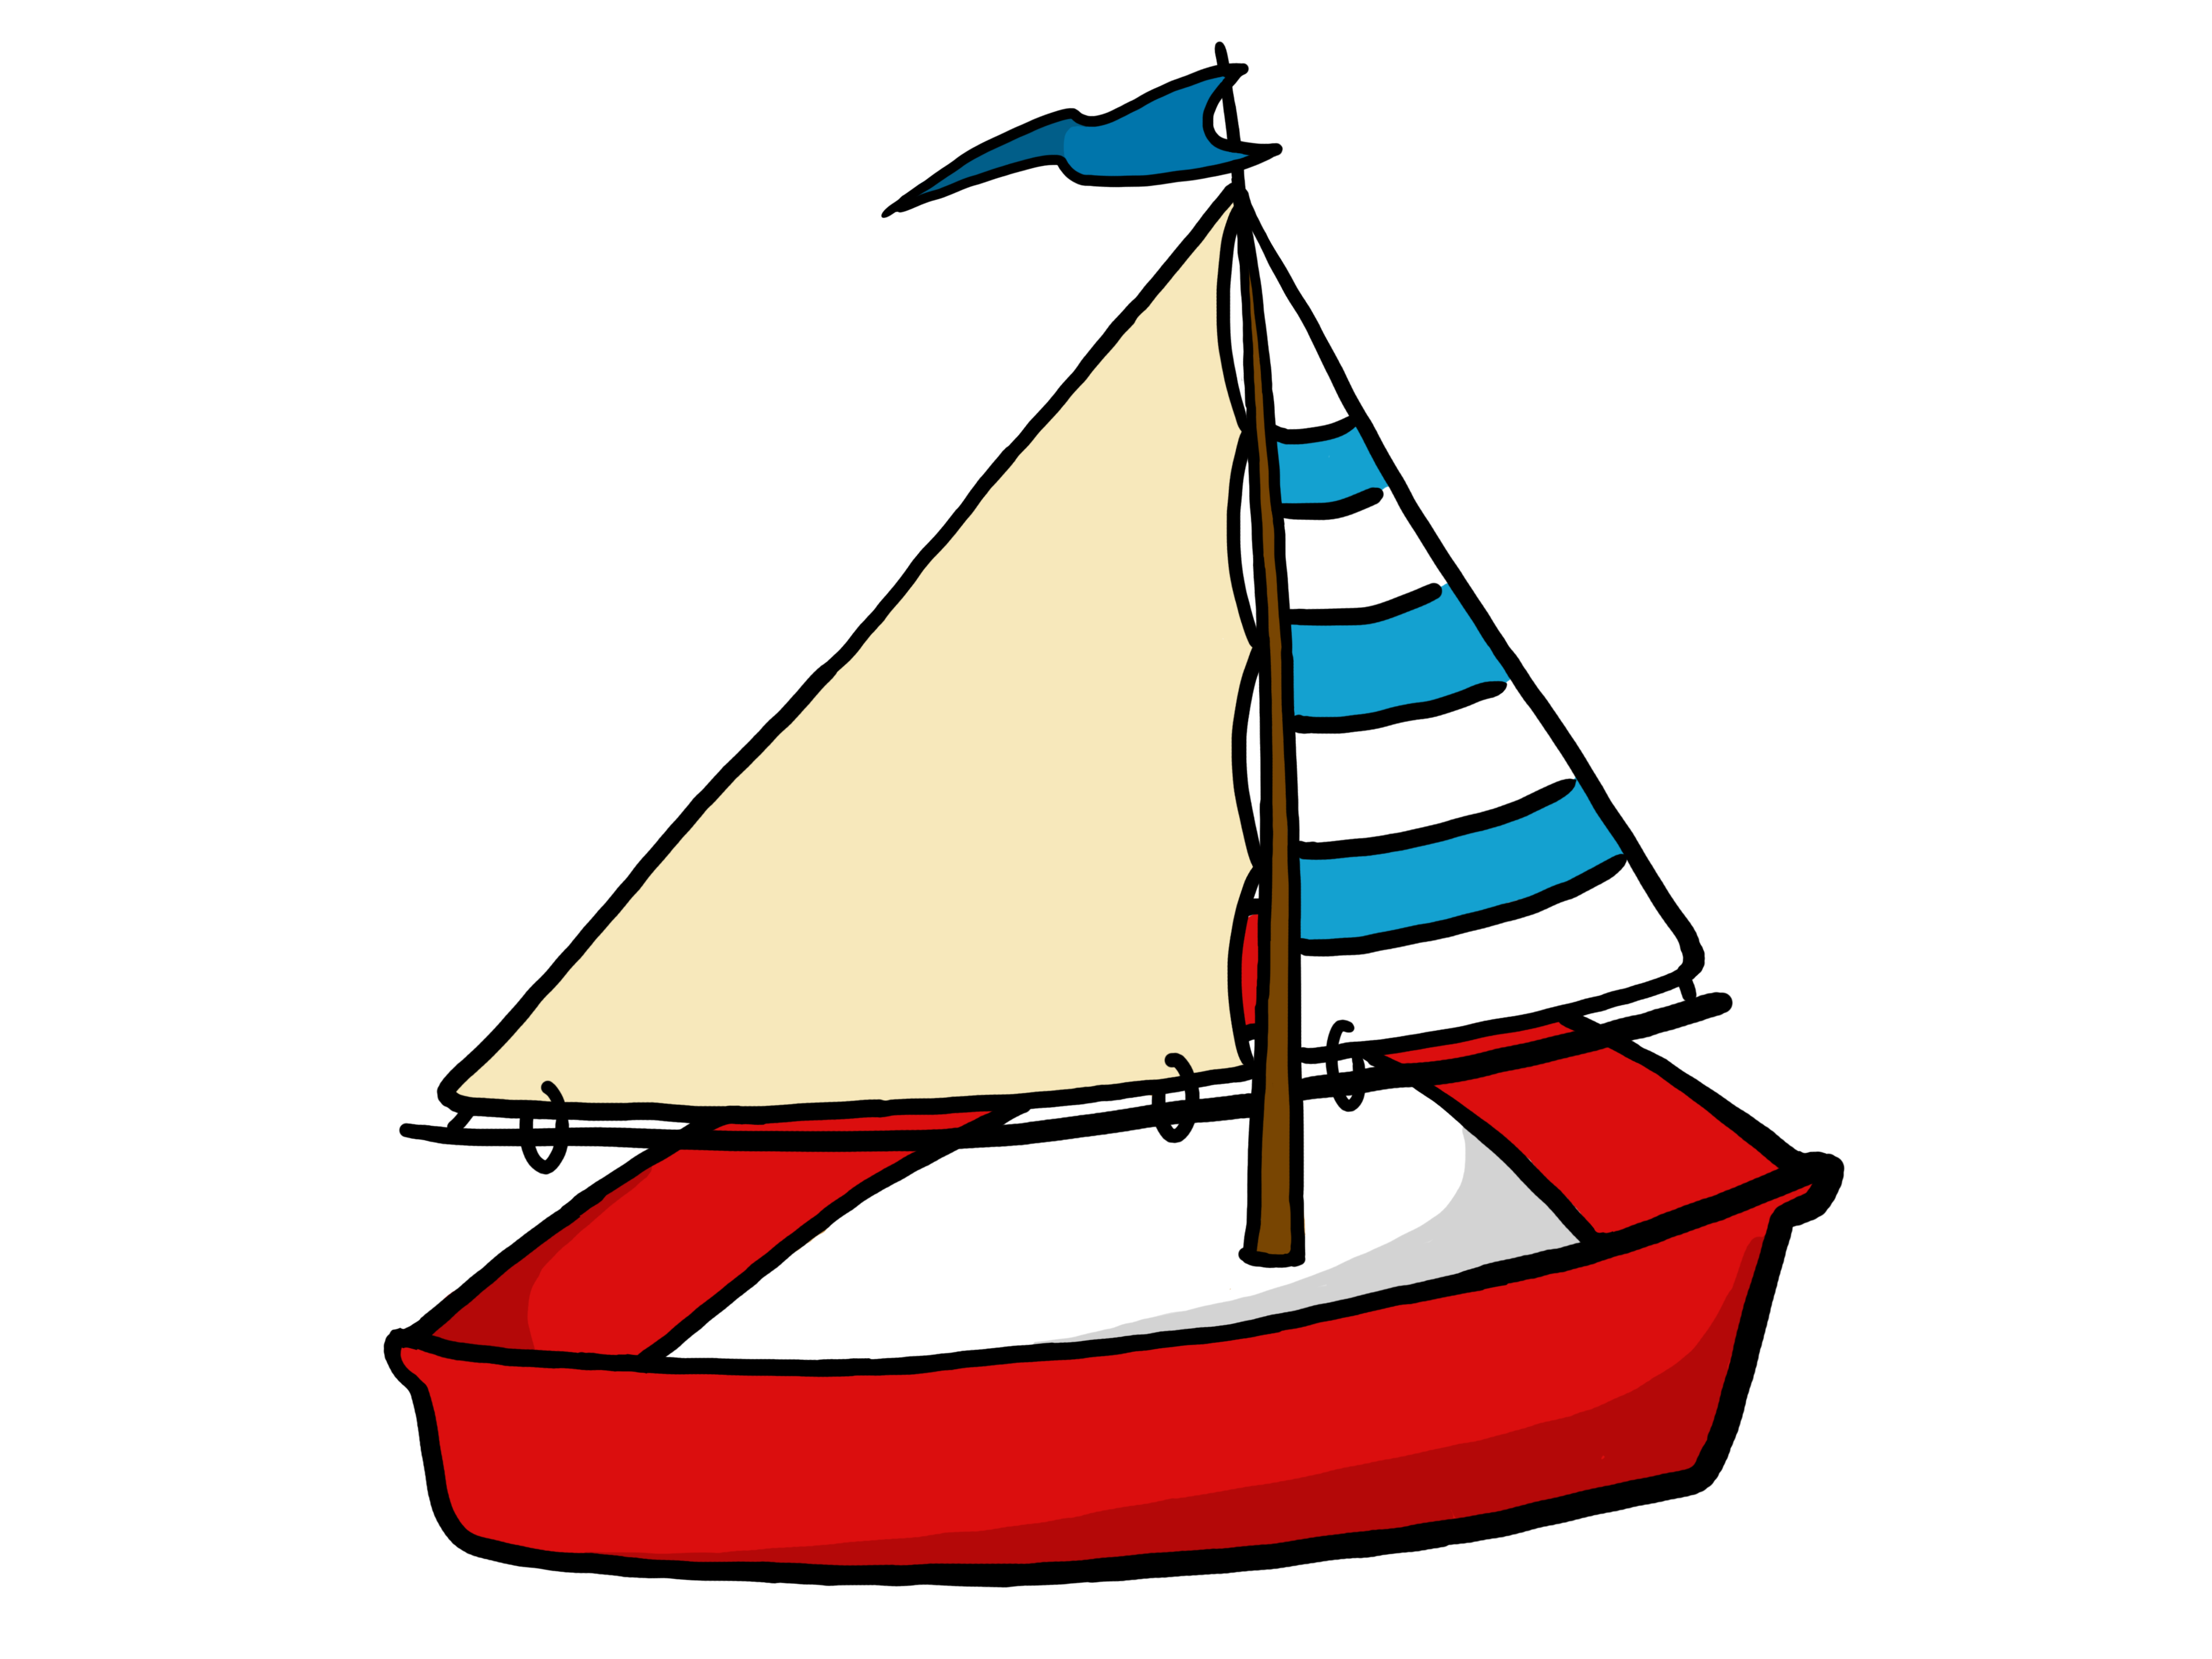 Toy Boat Clipart.